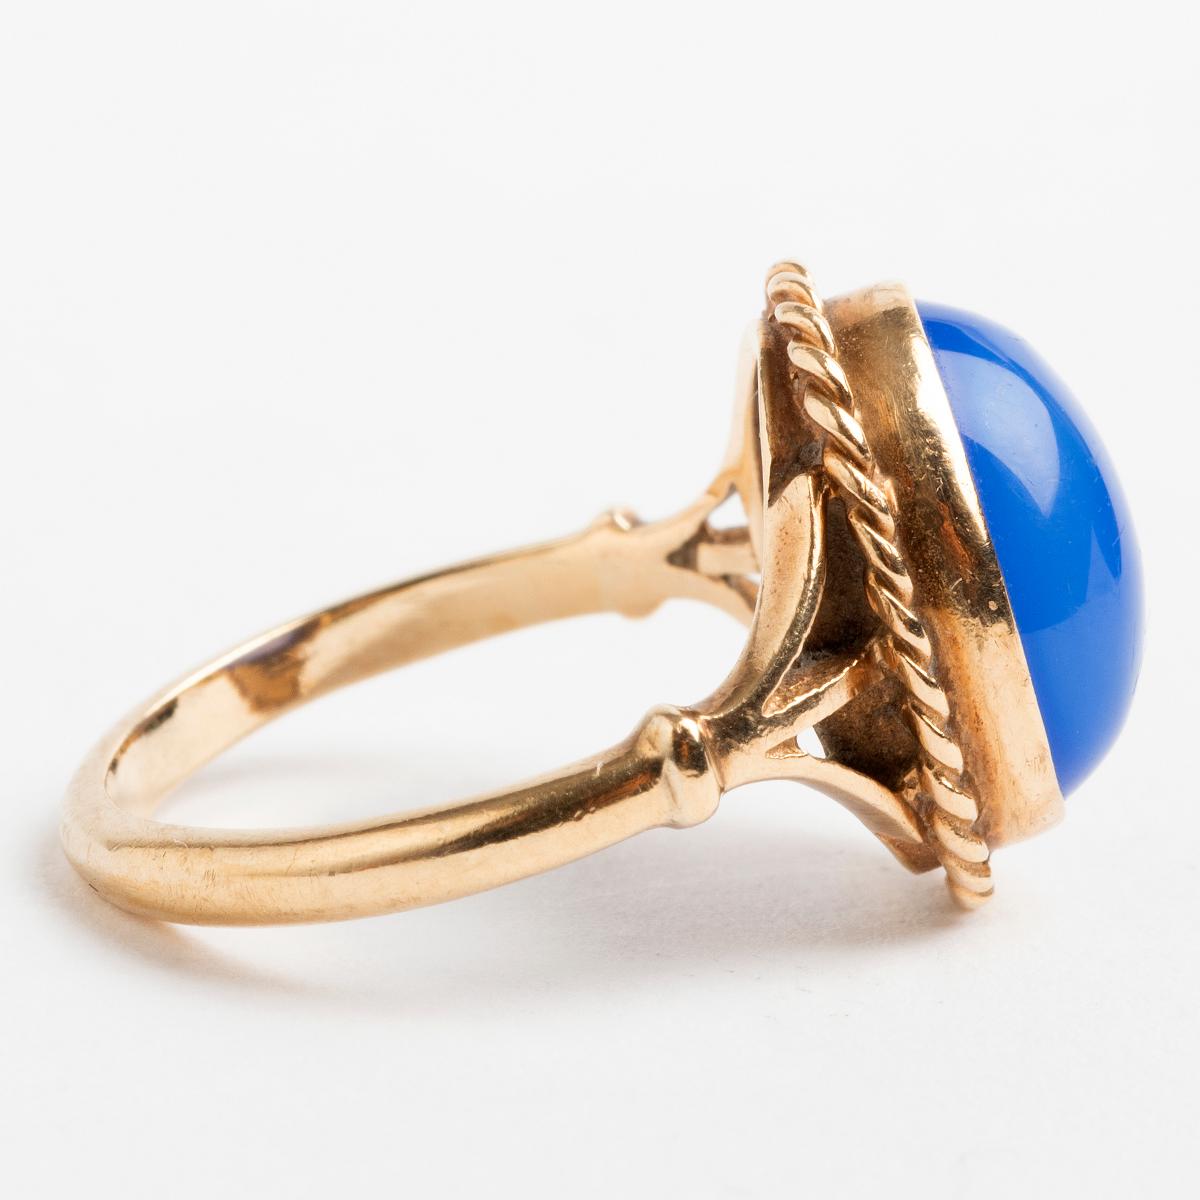 Our vintage cabochon blue chalcedony dress ring exudes period appeal., the stone in a rubber setting with plaited surround in 9k yellow gold. We date this ring to c mid 1960s. The ring size is L.

A unique piece within our carefully curated Vintage